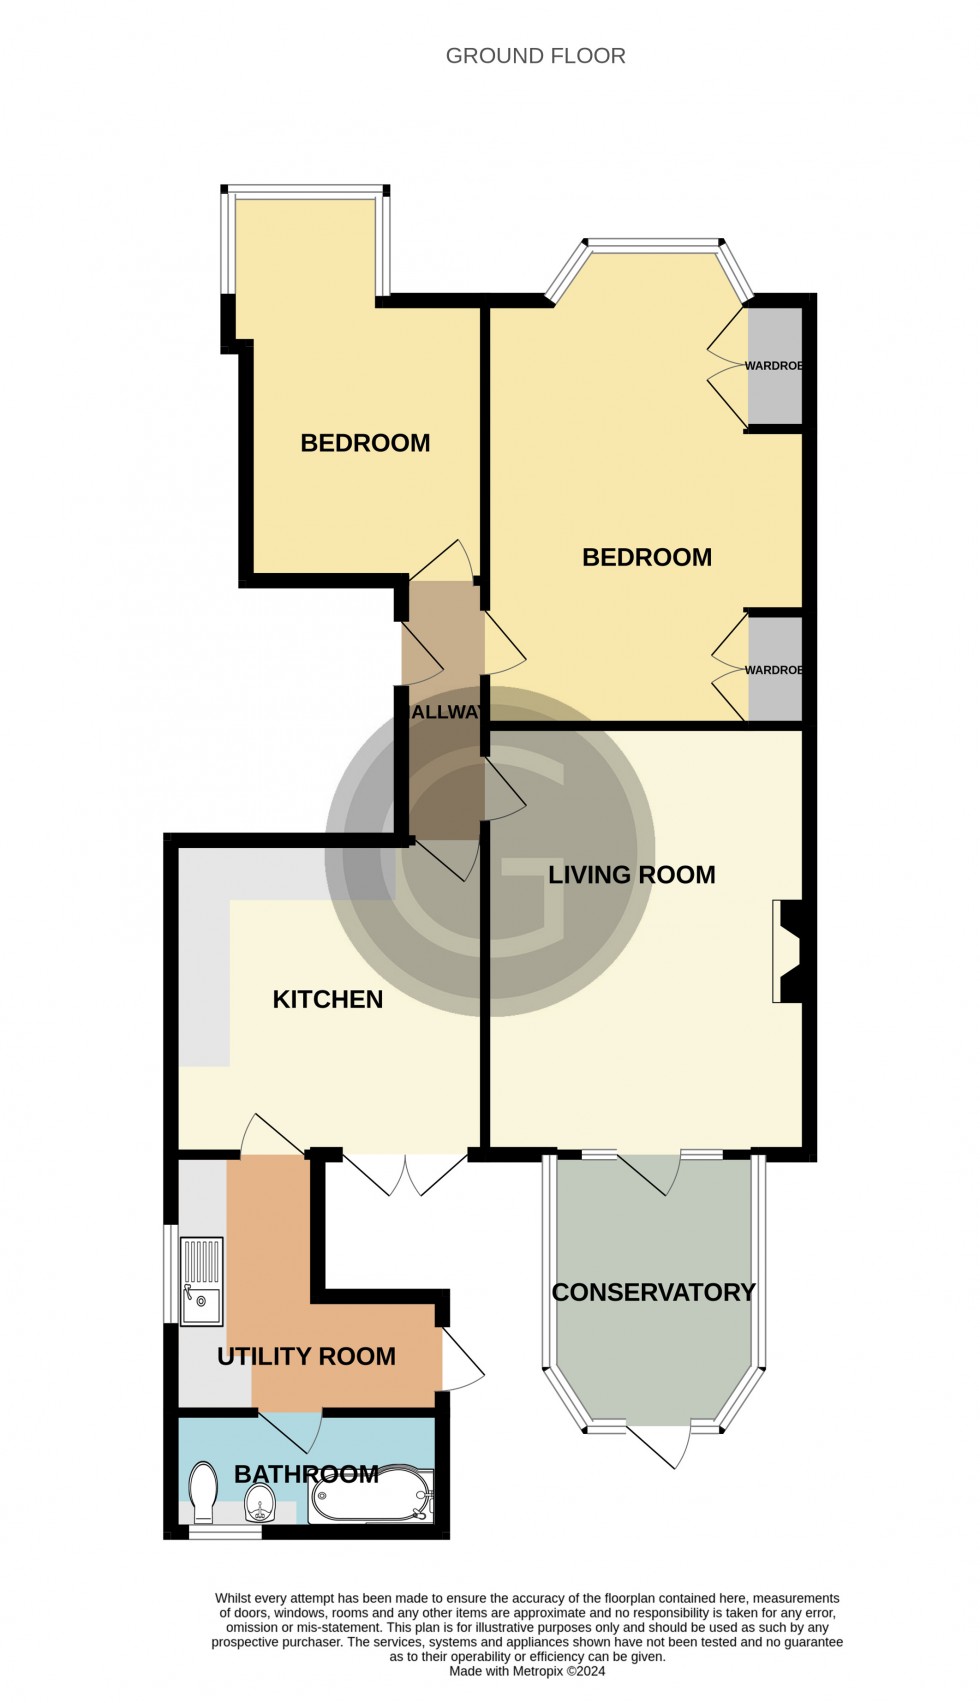 Floorplan for Wickham Avenue, Bexhill on sea, East Sussex